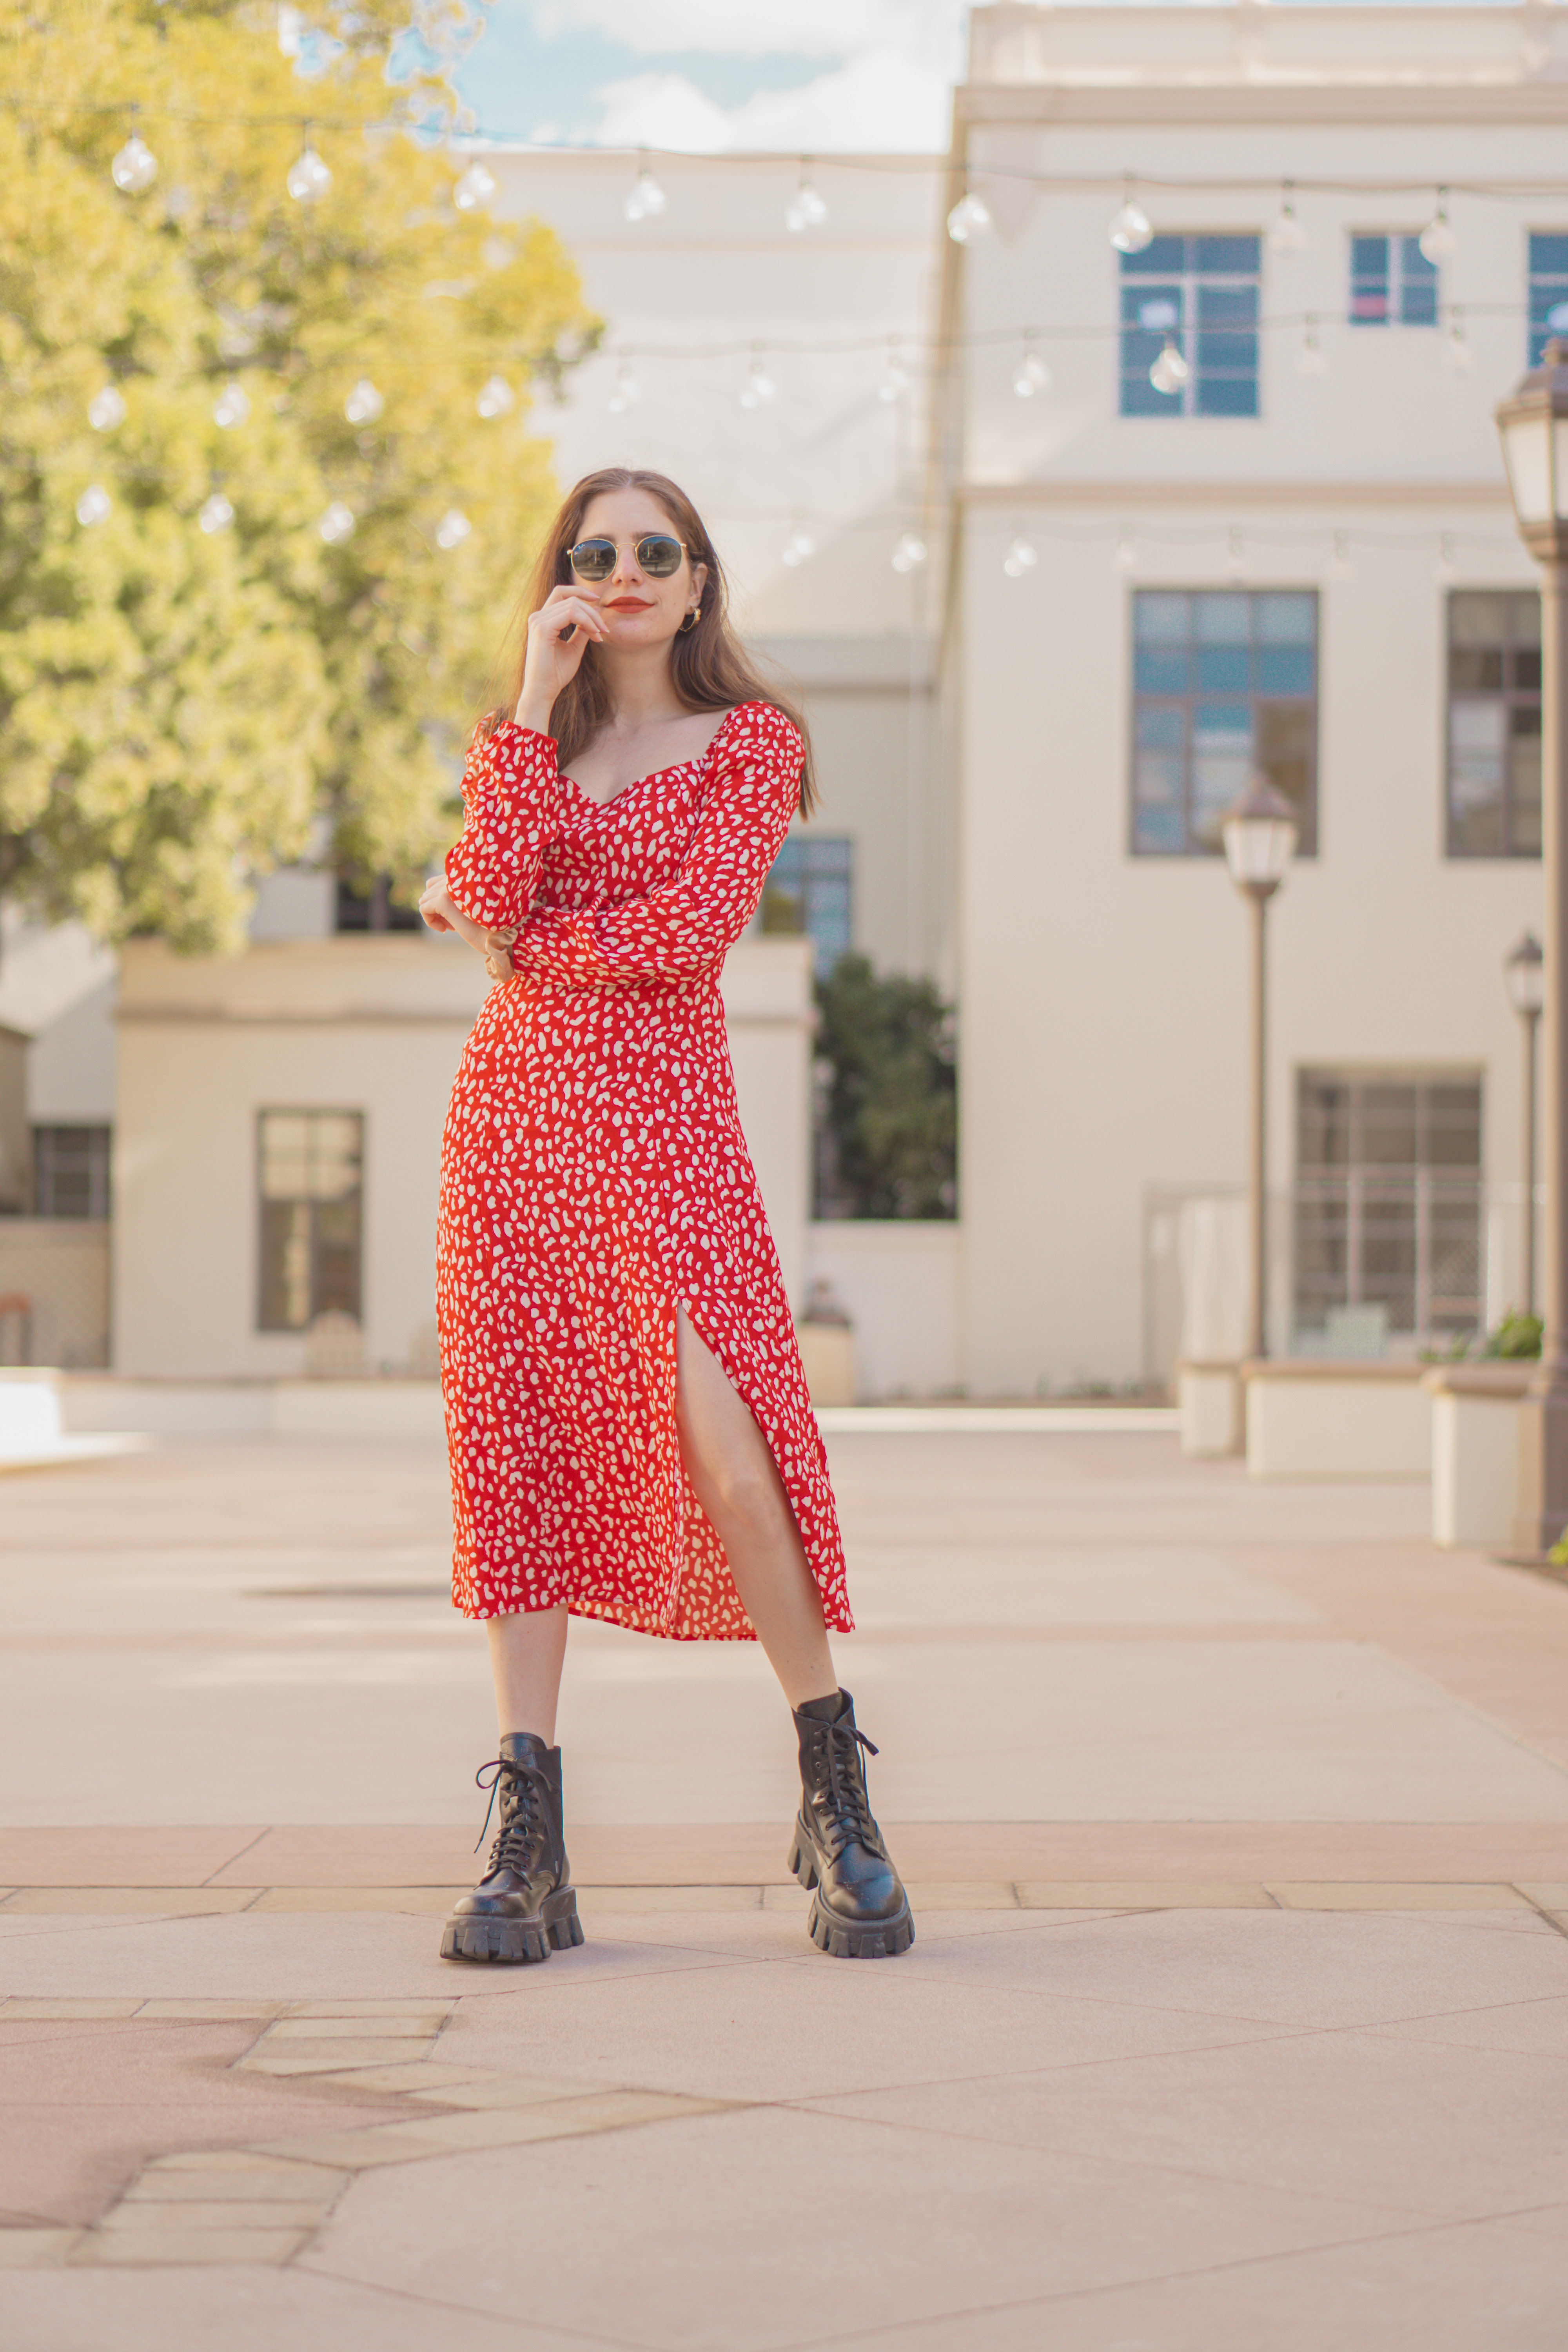 5 Valentine’s Day Date Outfit Ideas for Women this Season